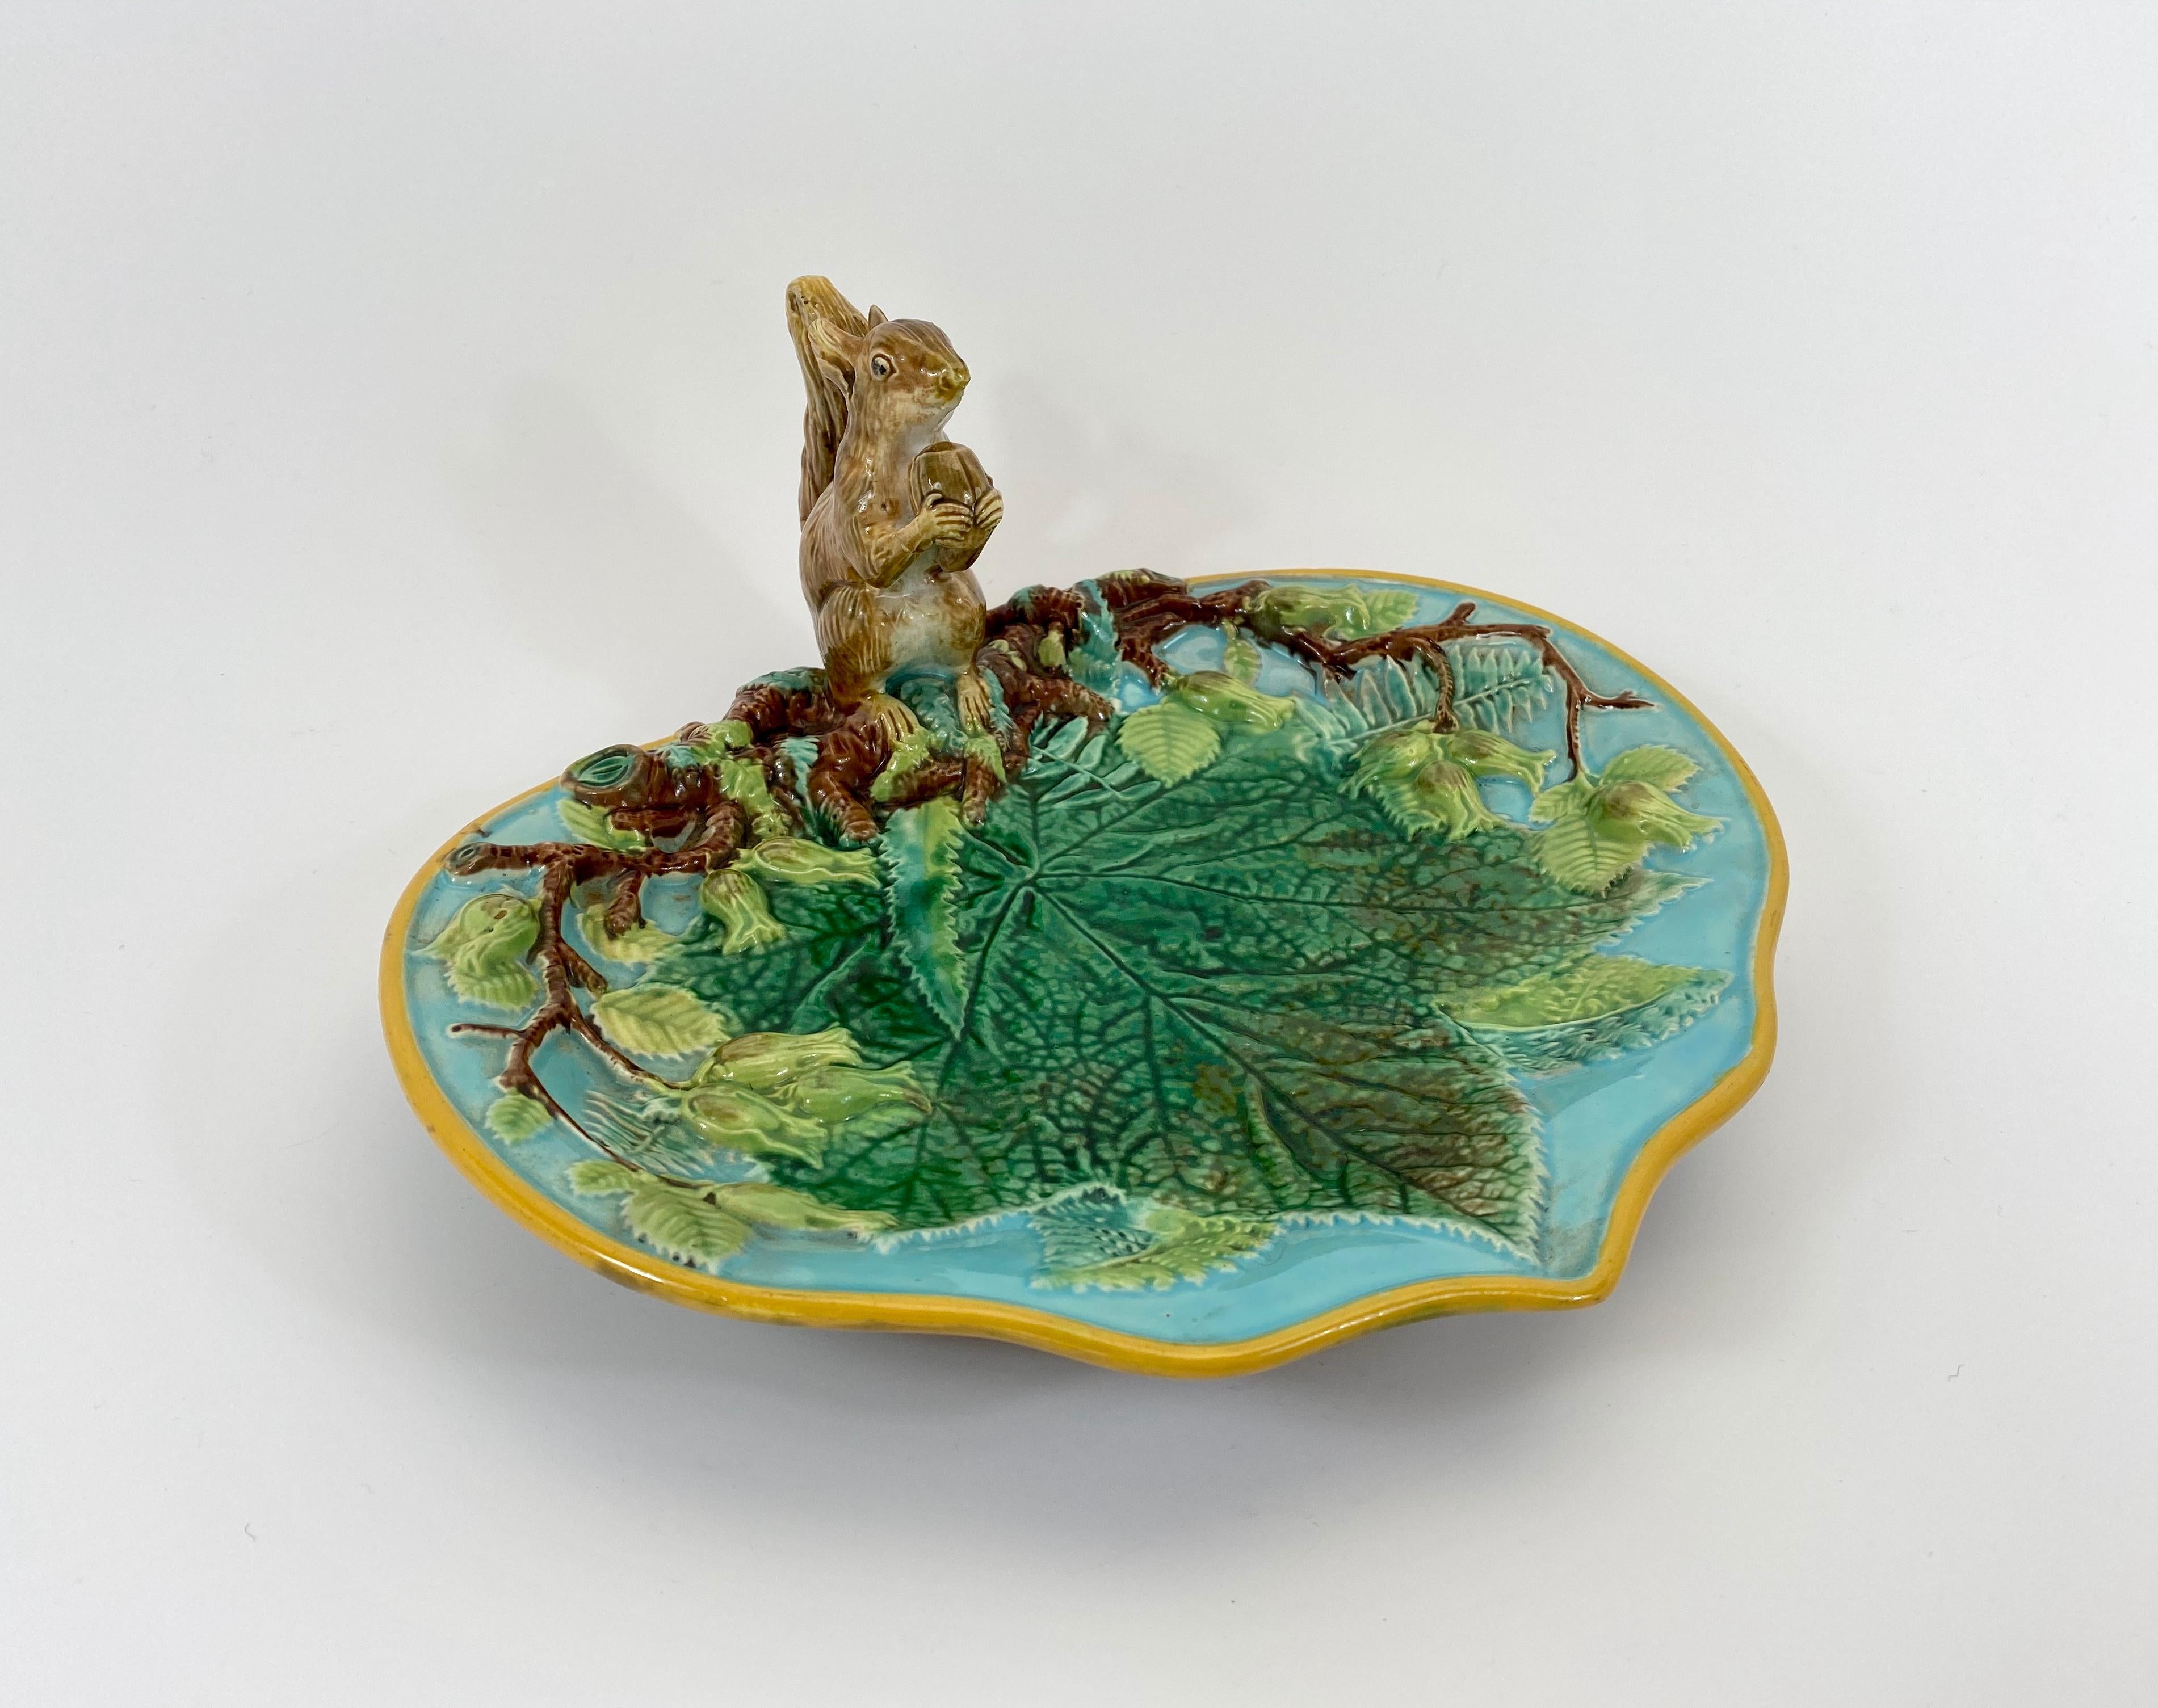 A George Jones Majolica squirrel dish, circa 1875. The dish, moulded in high relief, with a large leaf, and flowering branch. Surmounted by a finely moulded squirrel, holding a large nut. Covered in typical Majolica glazes.
The underside decorated